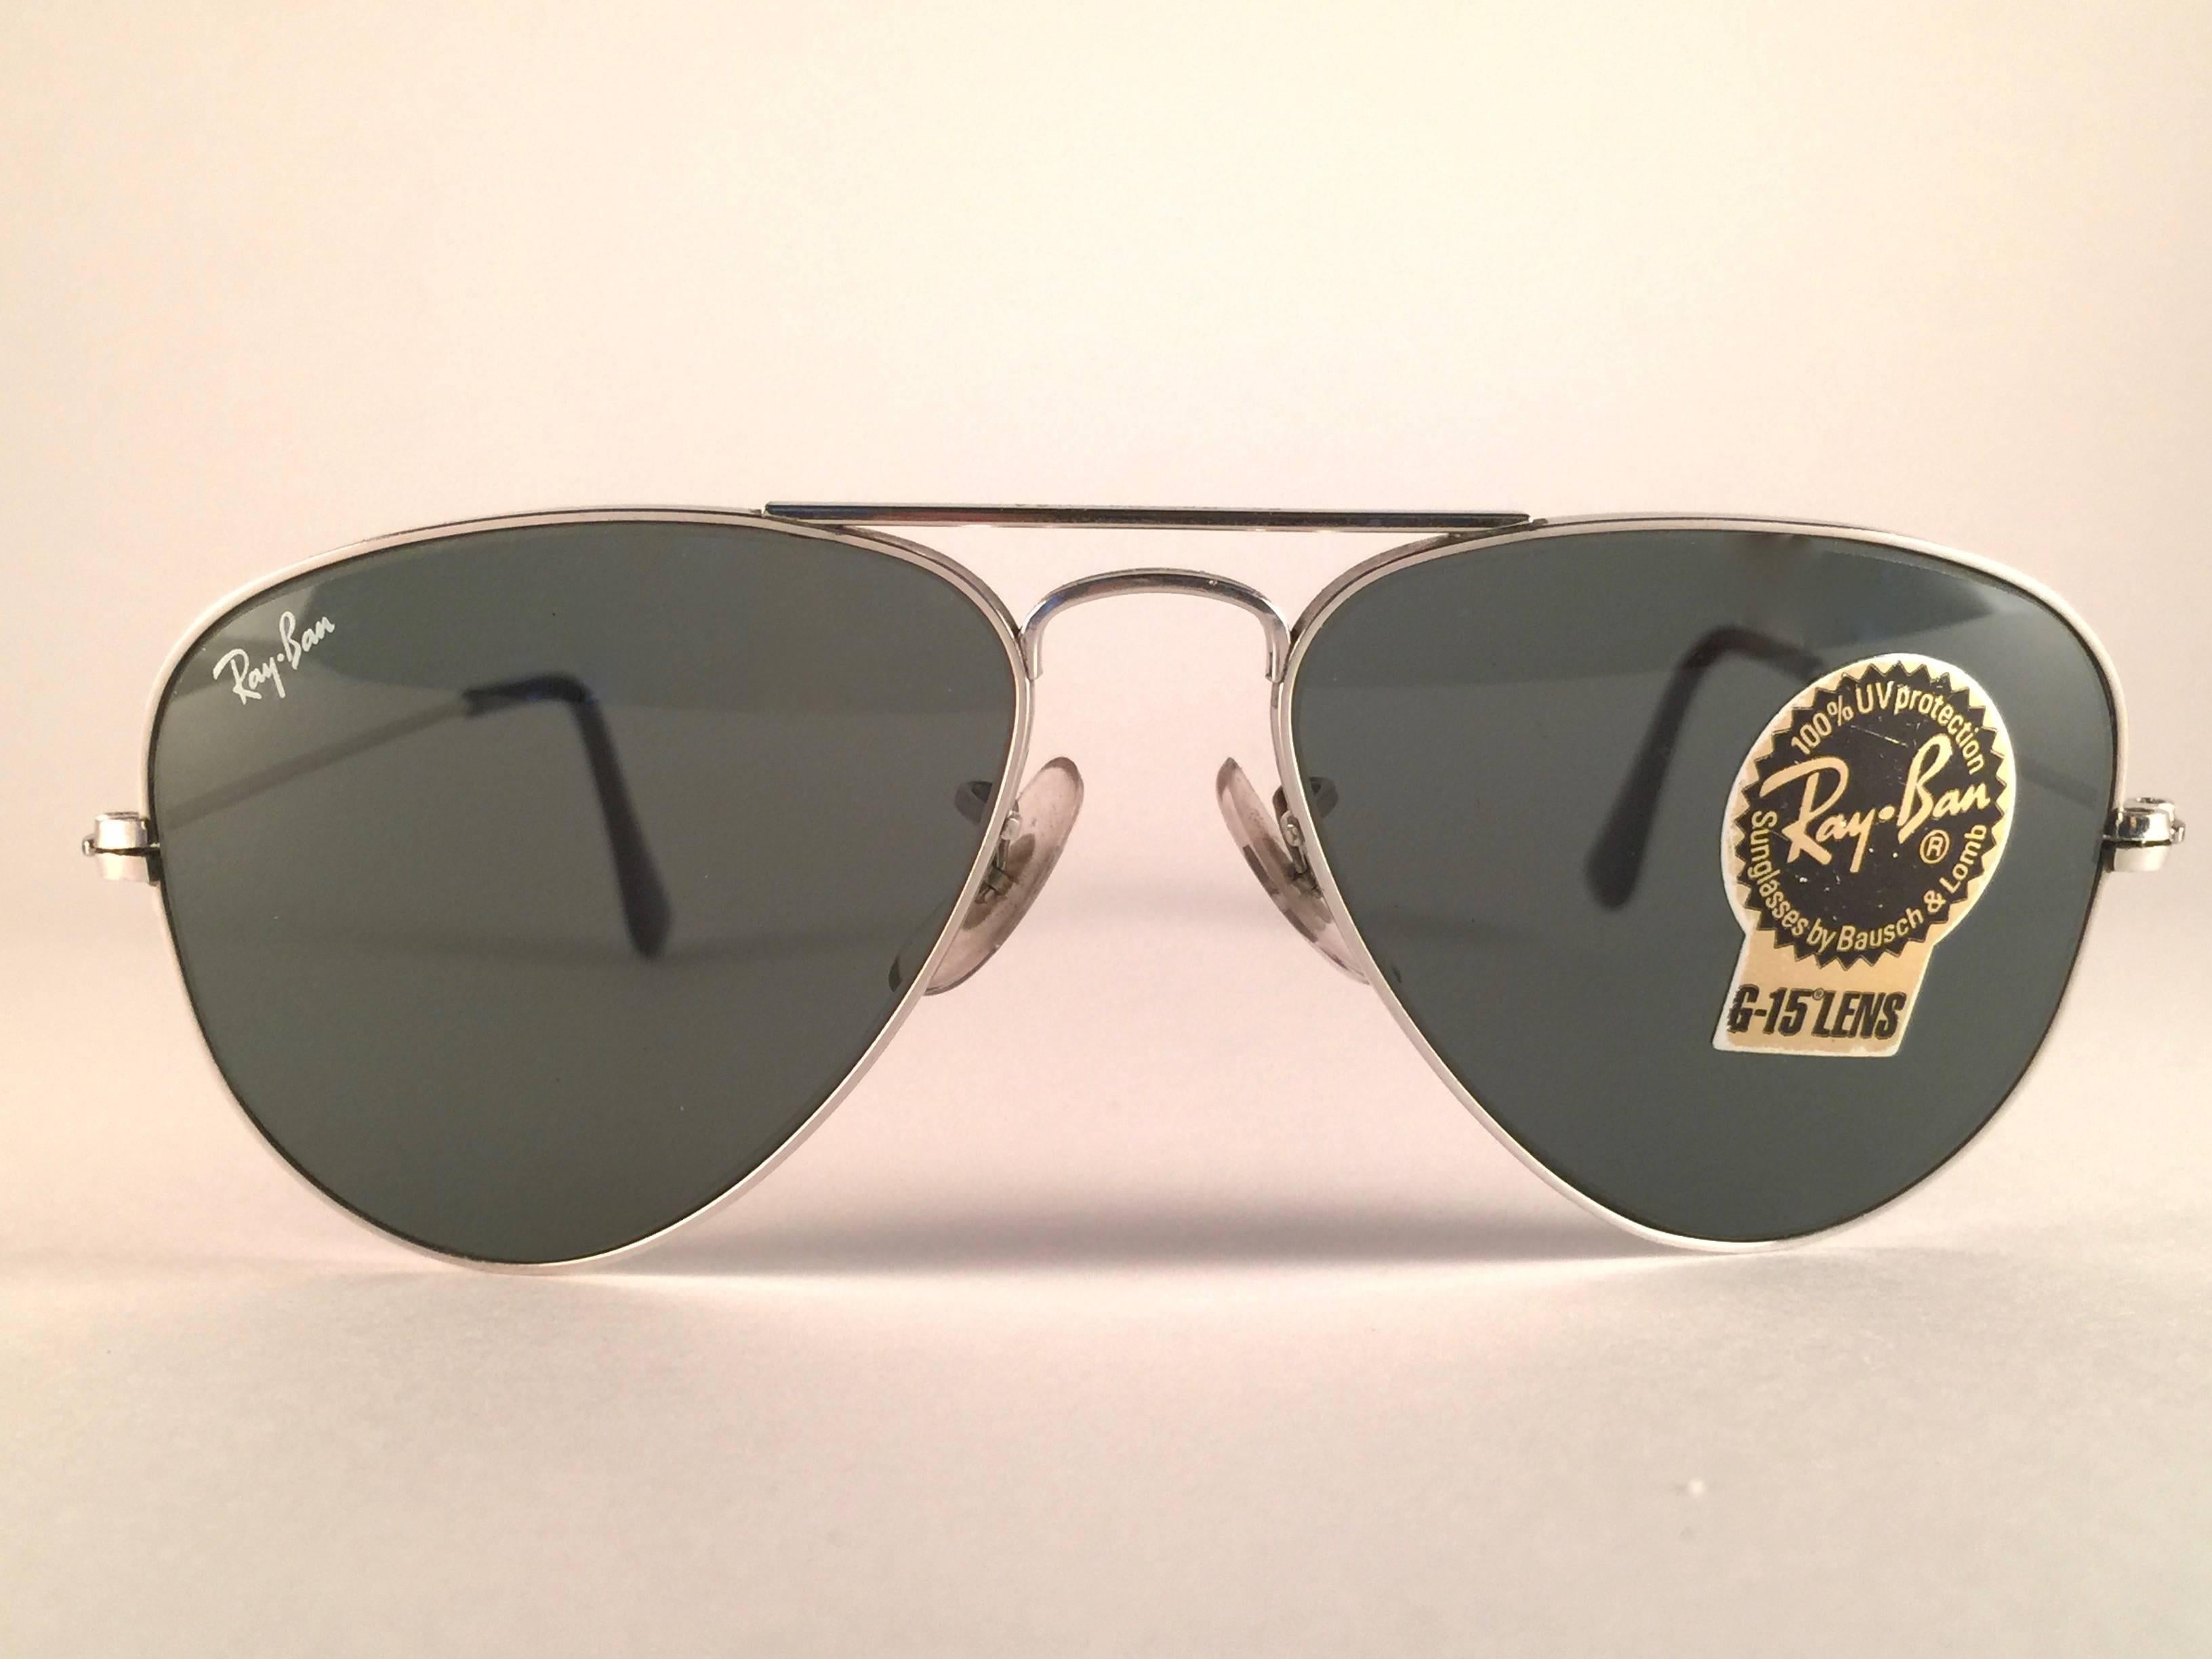 New Super special vintage Ray Ban Aviator Silver frame with B&L G15 Grey Lenses in SIZE 52!! 
The smallest size available, suitable for children.  
Comes with its original Ray Ban B&L case.
Rare and hard to find in this new, never worn or displayed